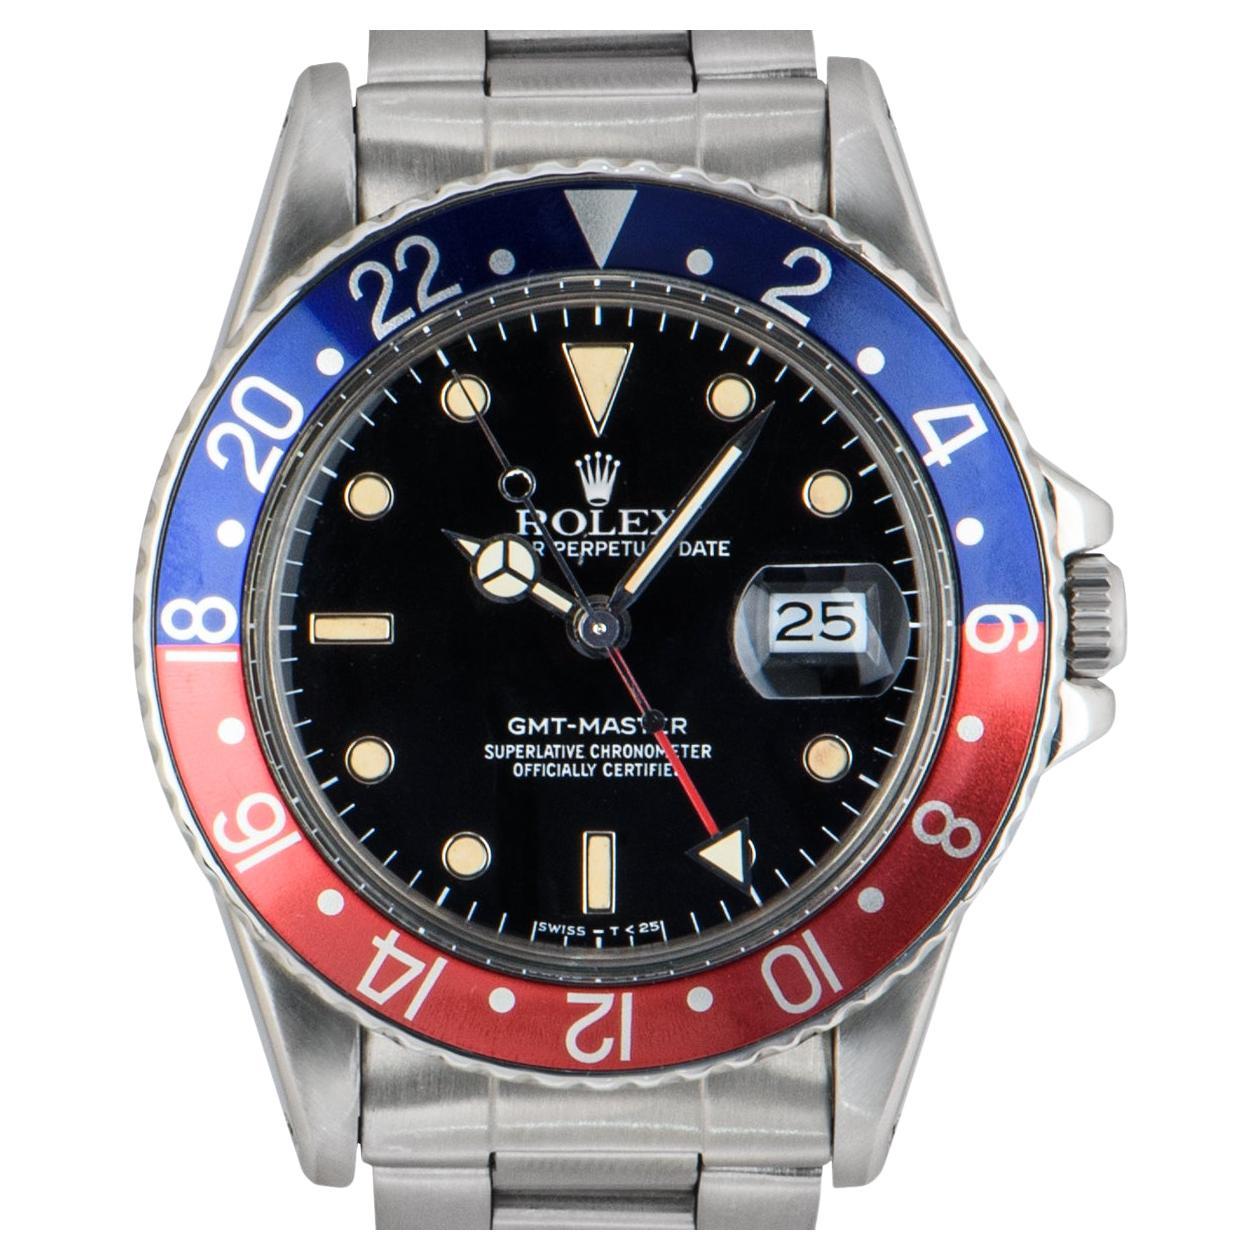 A Stainless Steel Transitional GMT-Master Vintage Men's Wristwatch, black dial with applied hour markers, date at 3 0'clock, a stainless steel bi-directional rotating bezel with a blue and red 